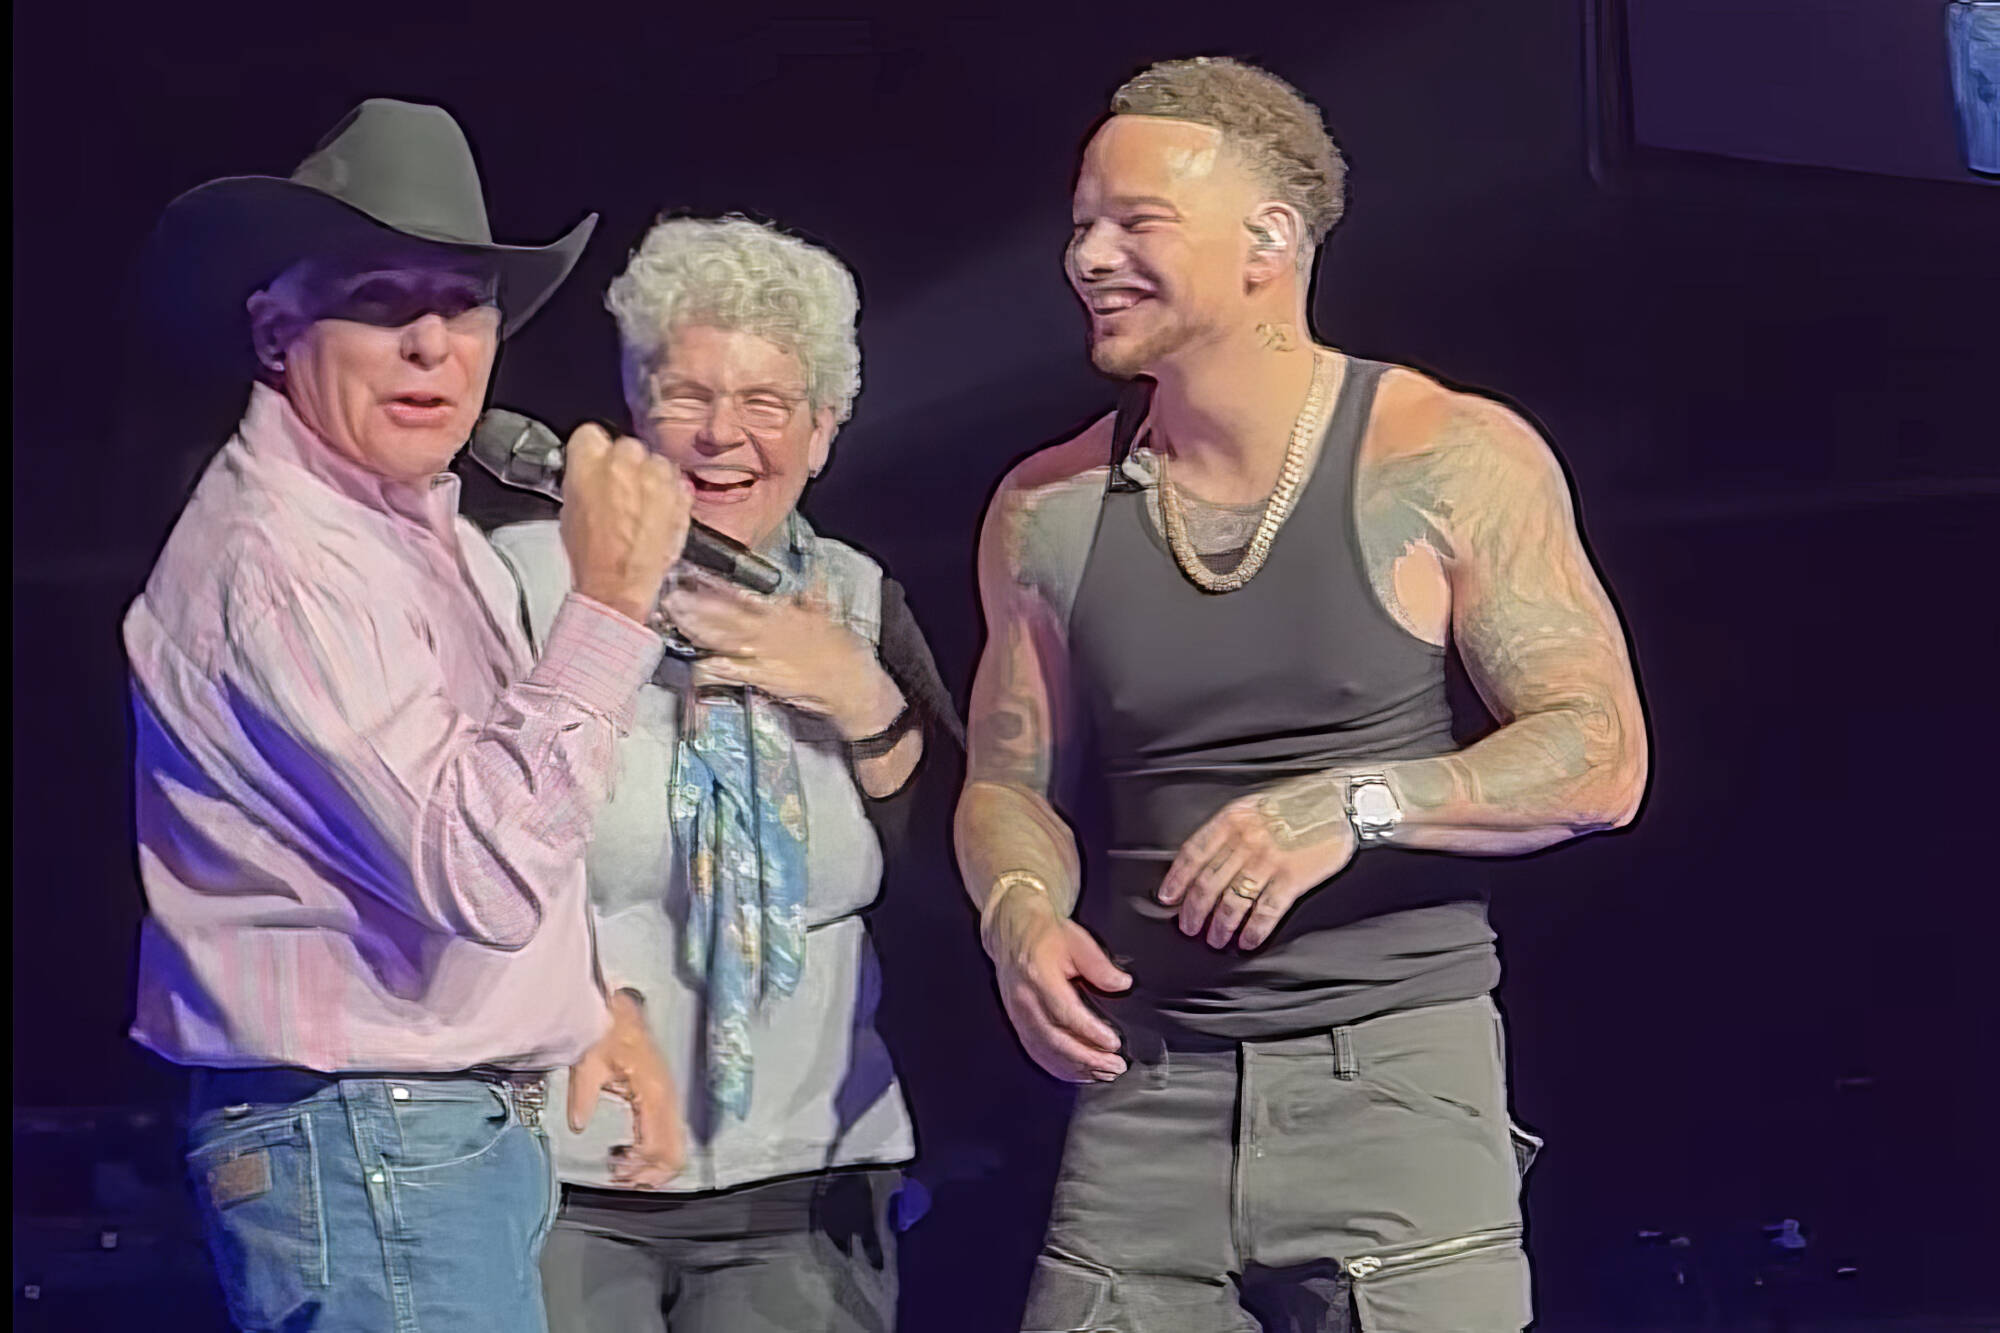 Casey Cawston and Dianne Clifton were invited up on stage by Kane Brown, with Cawston giving a shoutout to their hometown of Keremeos. (Facebook)